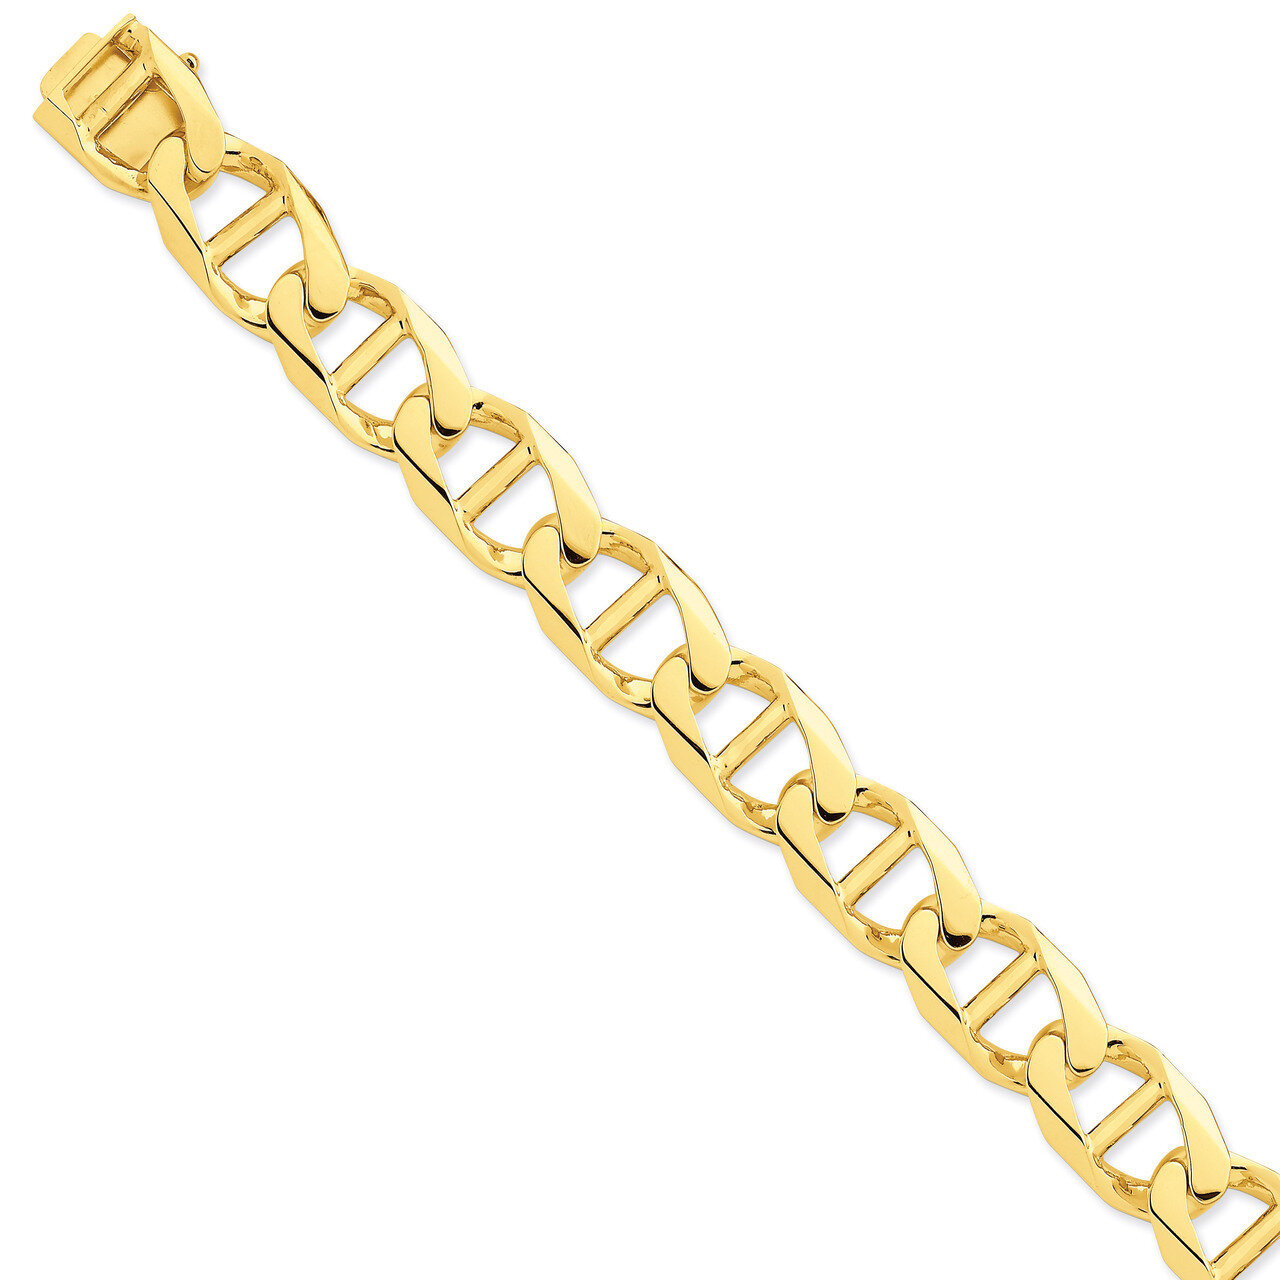 15mm Hand-Polished Anchor Link Chain 24 Inch 14k Gold LK104-24